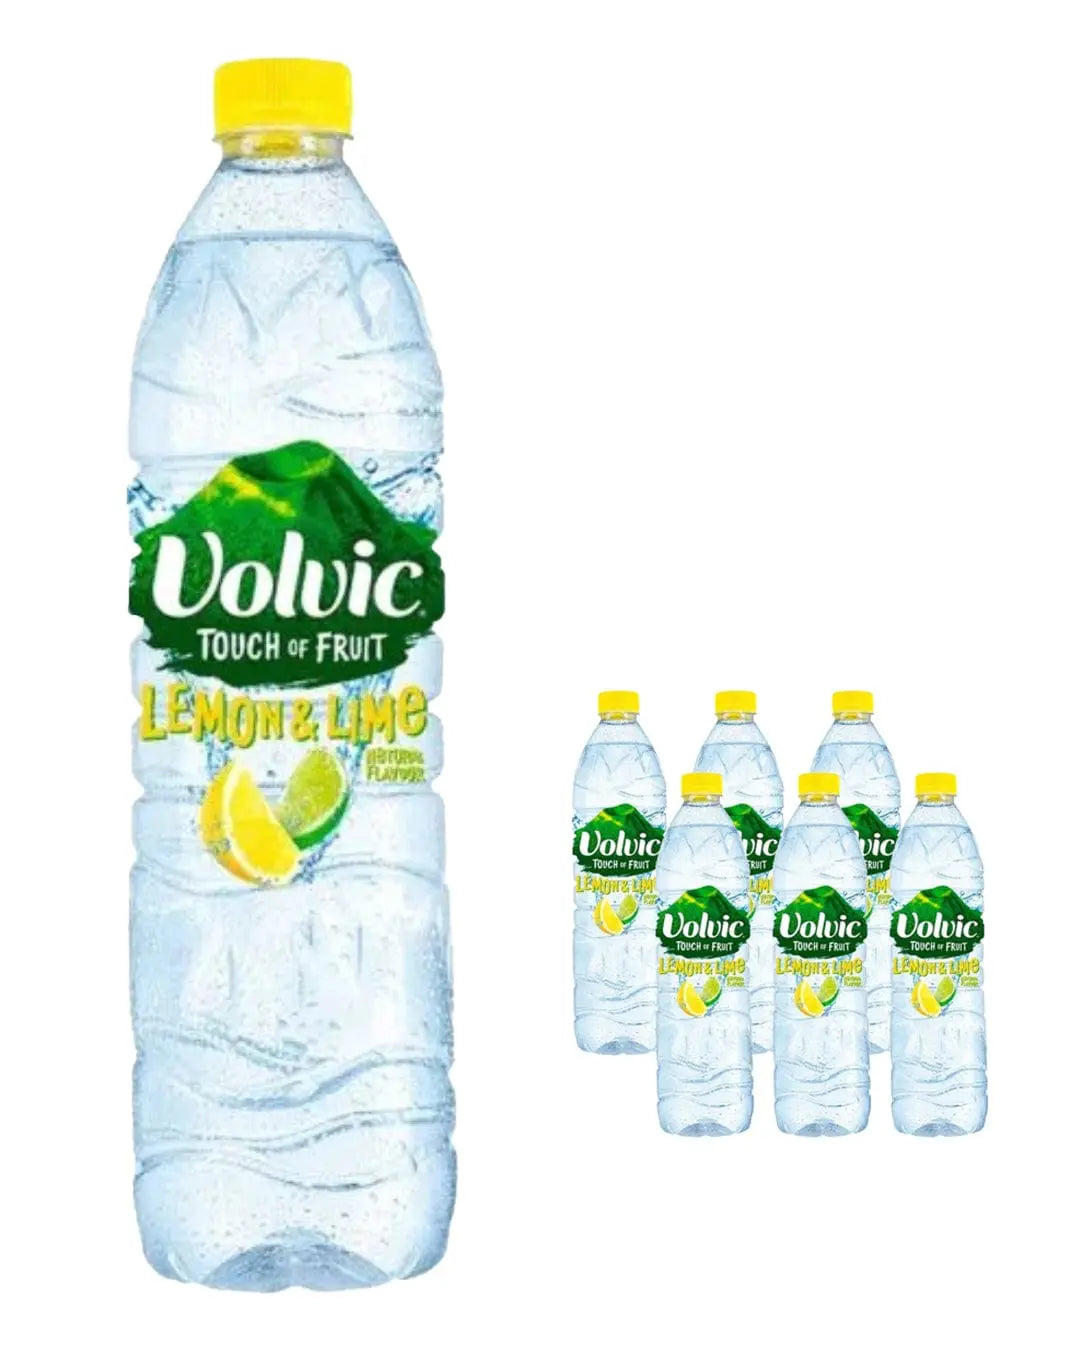 Volvic Touch of Fruit Lemon & Lime Flavoured Water Multipack, 6 x 1.5 L Water